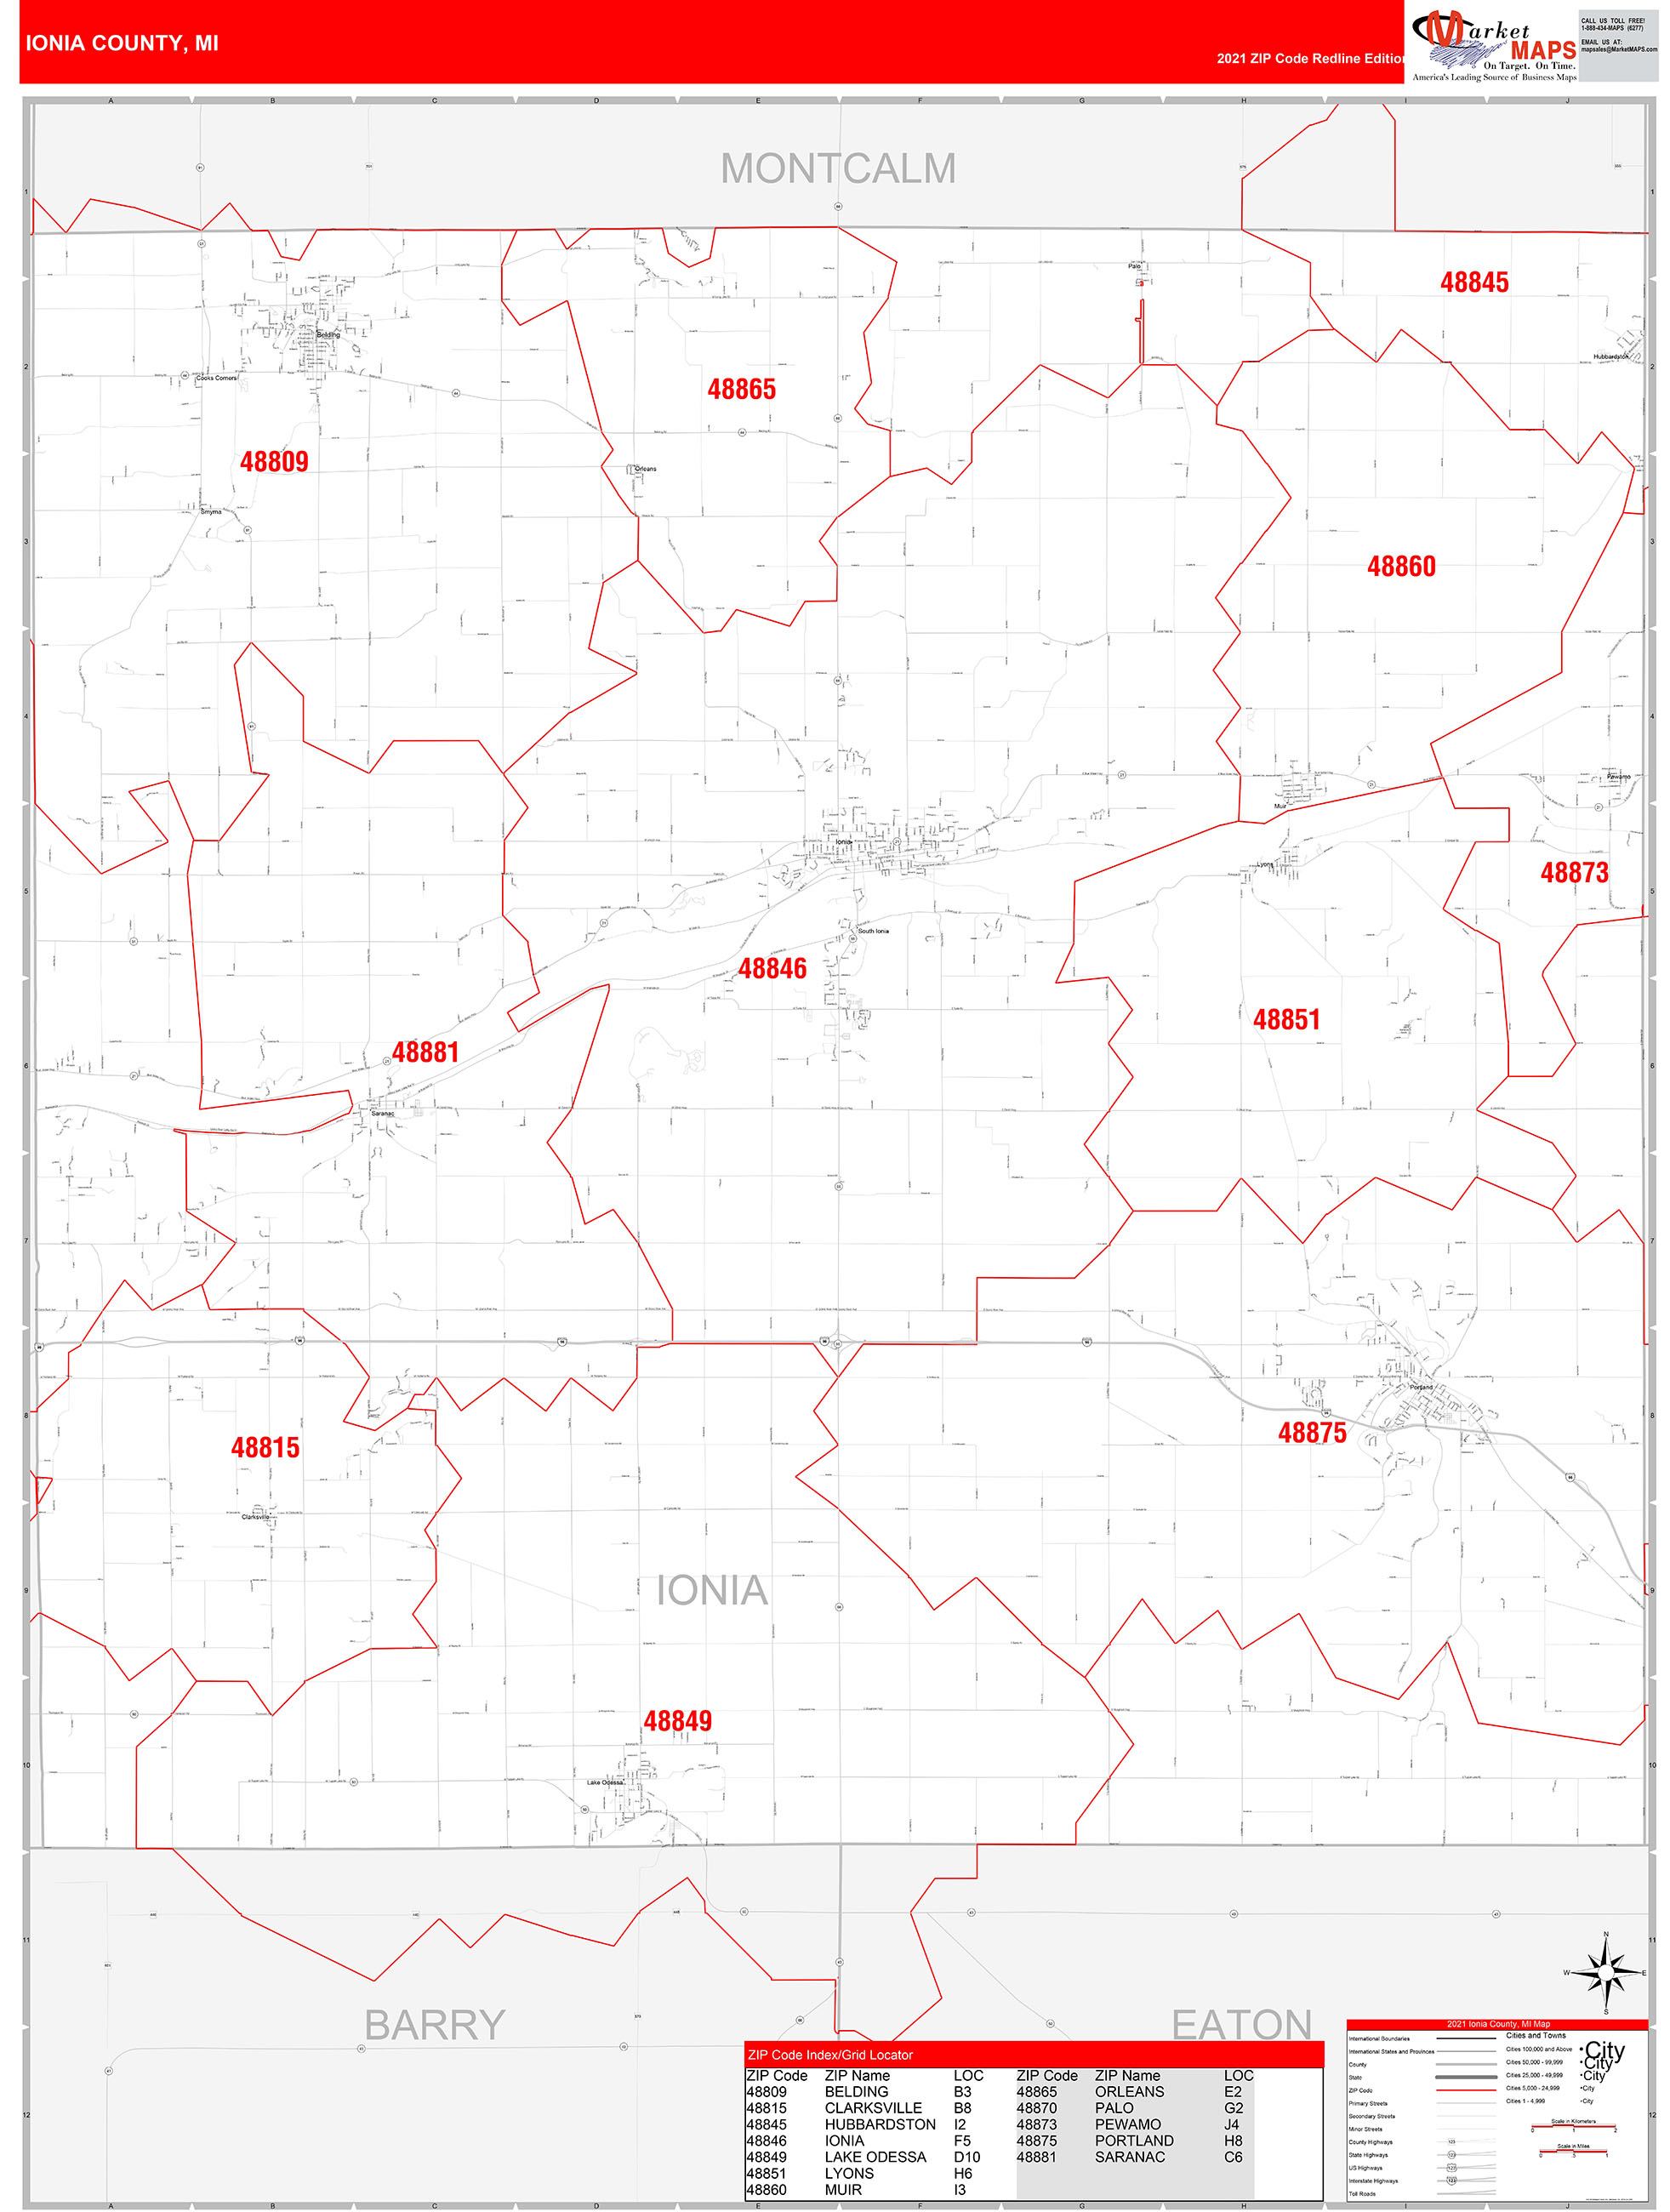 Ionia County, MI Zip Code Wall Map Red Line Style by MarketMAPS